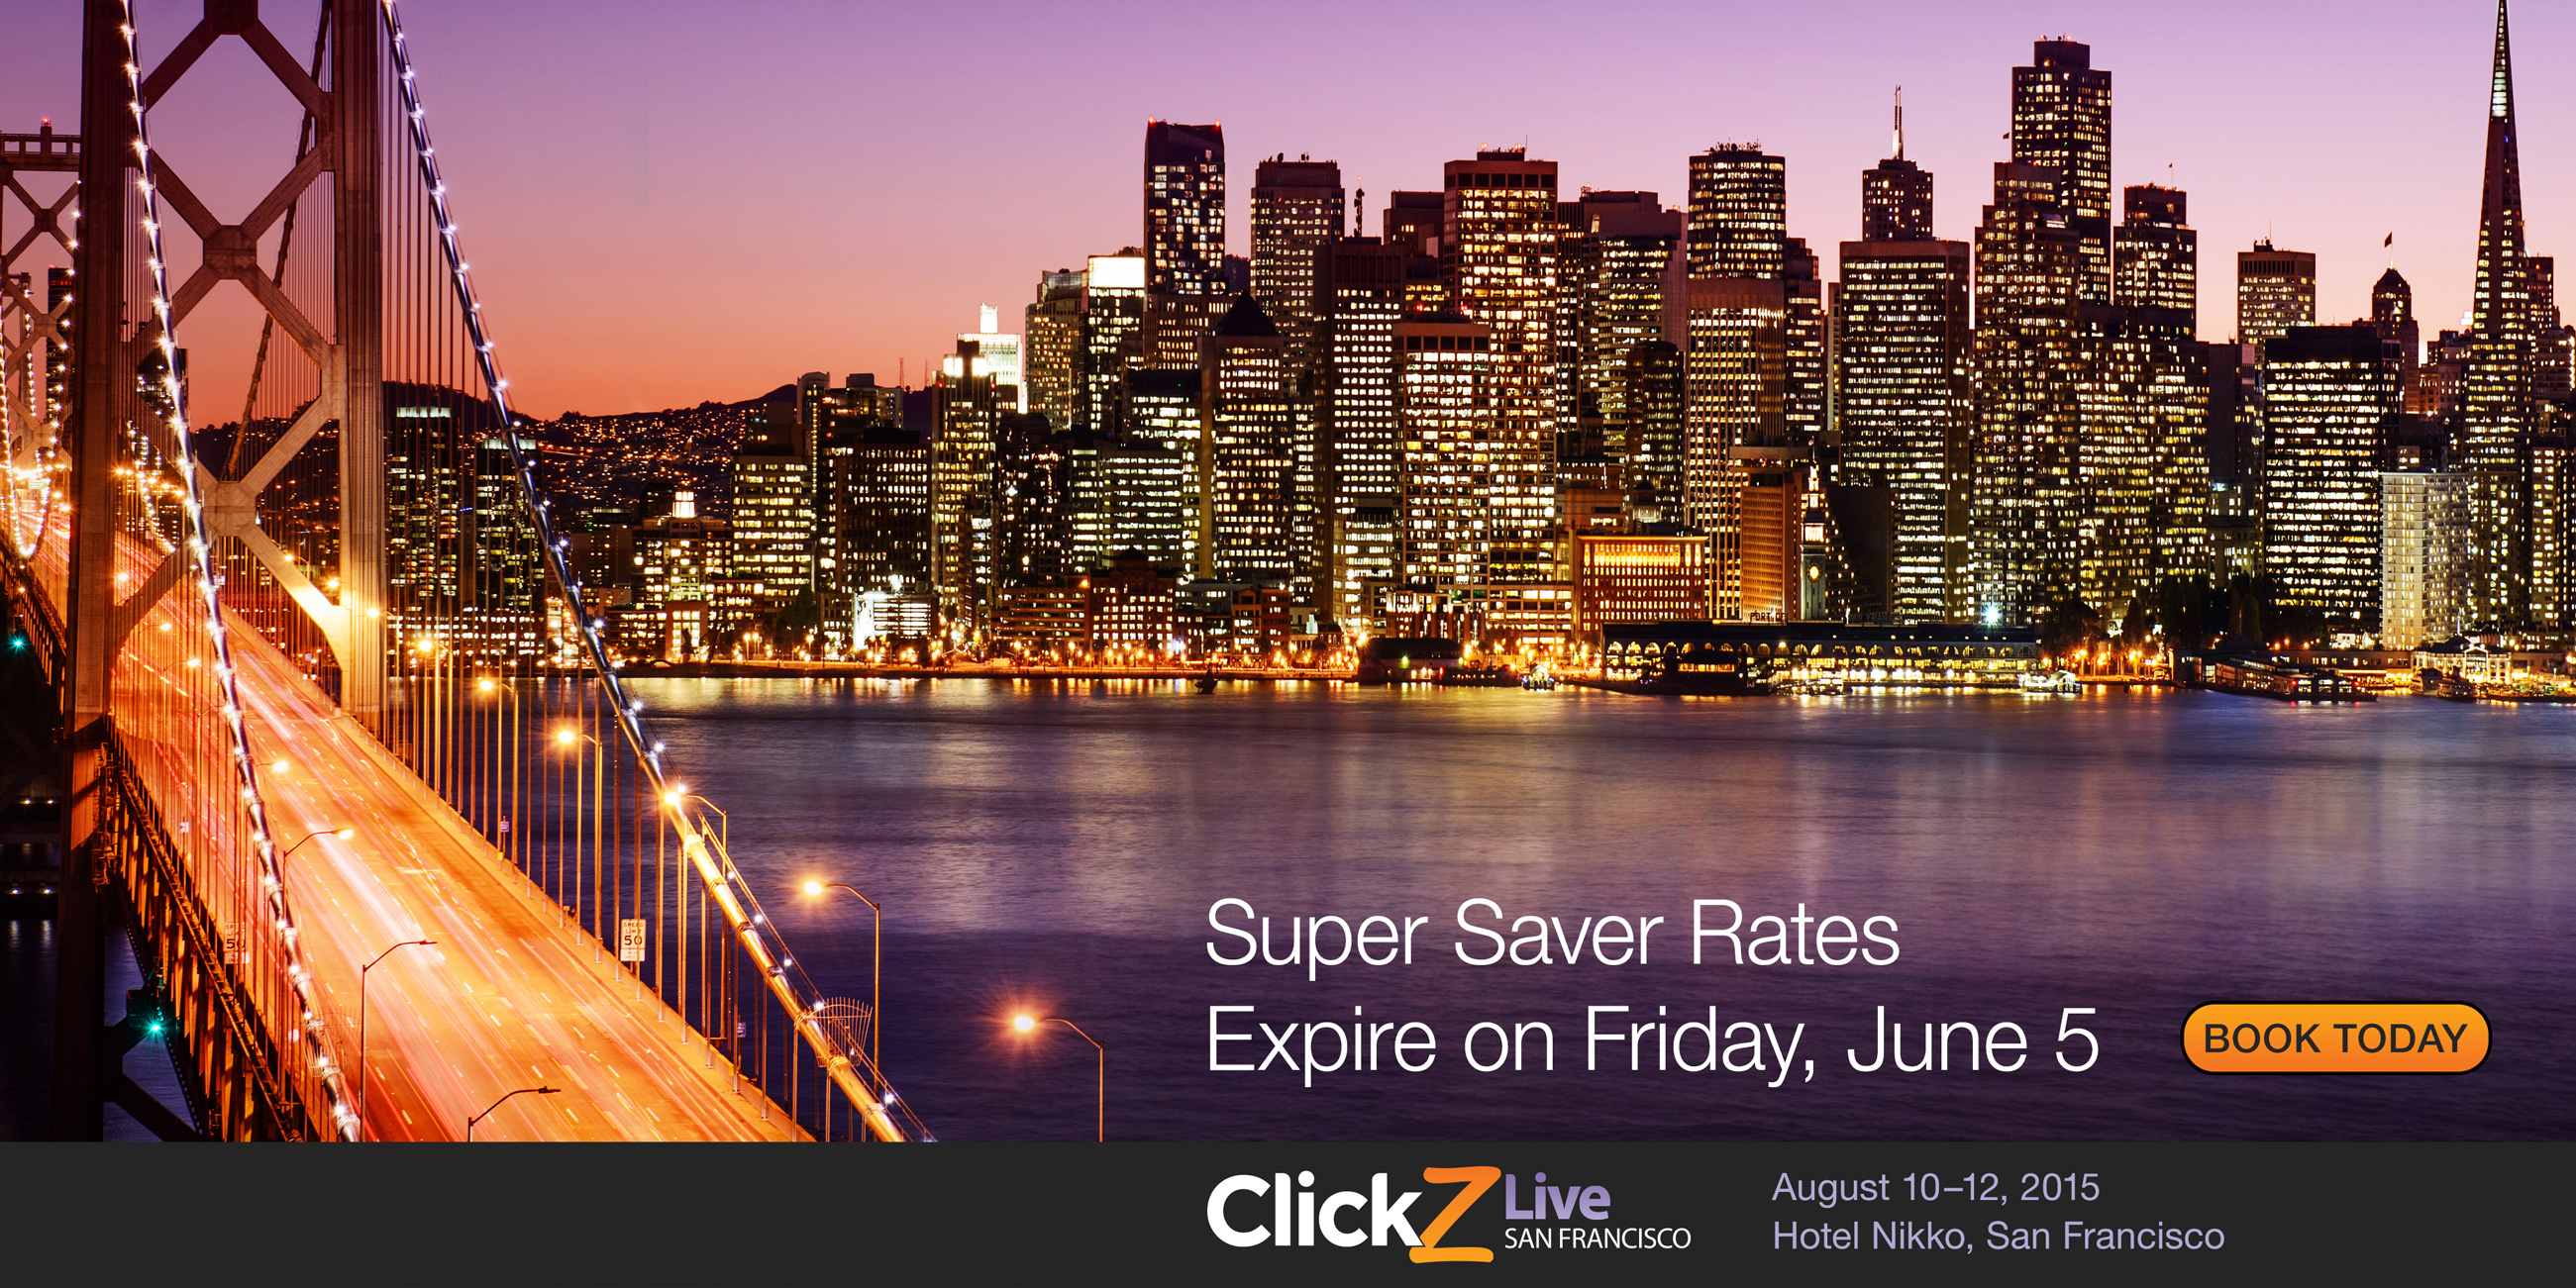 Display ad and social media image at 2:1 ratio for the ClickZ Conference in San Francisco. The photo is of the Bay Bridge at dusk. The bridge is on the left, lit in warm tones, and the waters of the bay are in purple tones. A lit skyline is in the background. At the bottom of the image are the ClickZ logo and conference information.